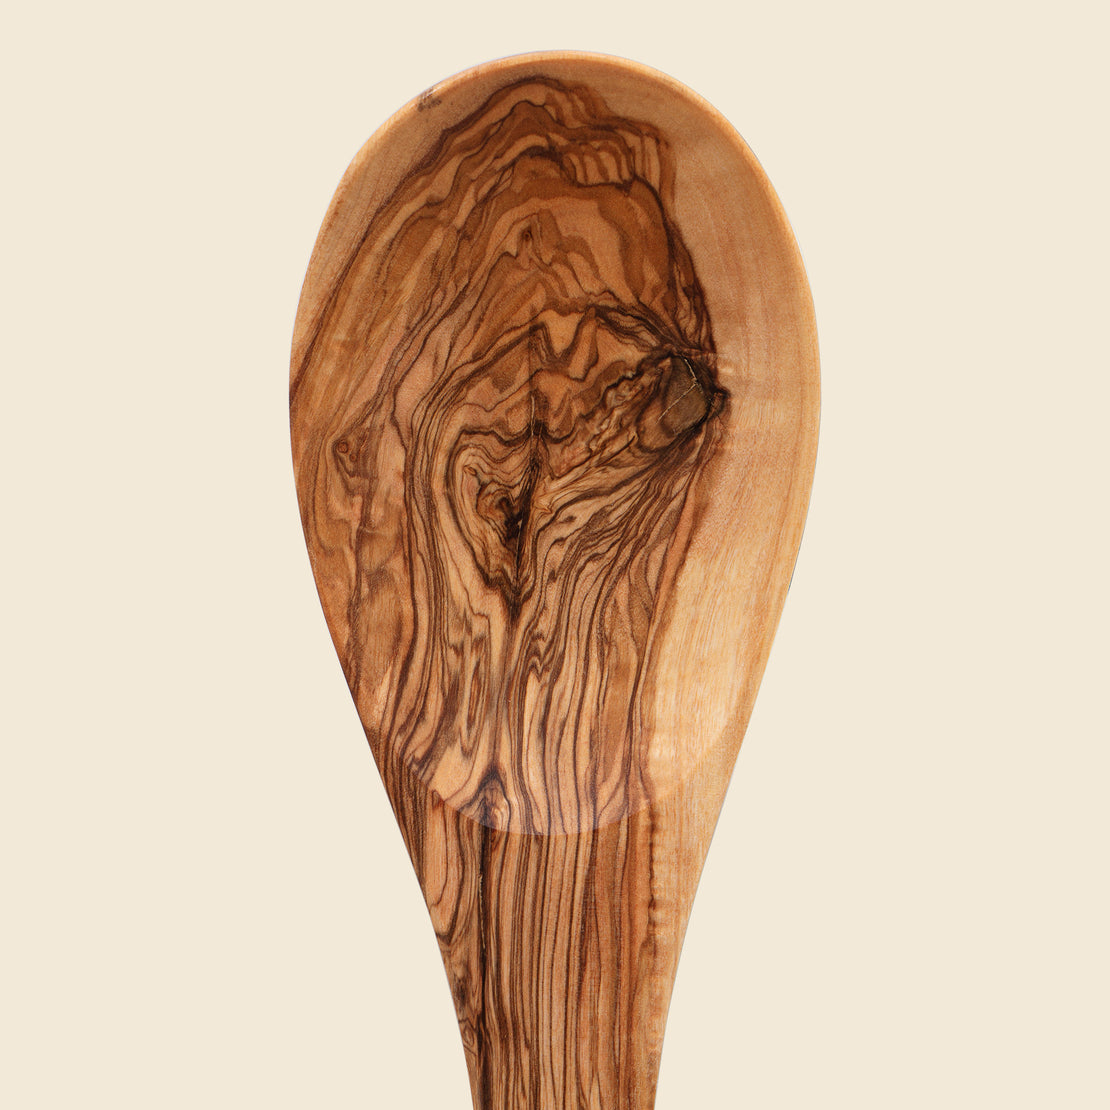 Olive Wood Long Spoon